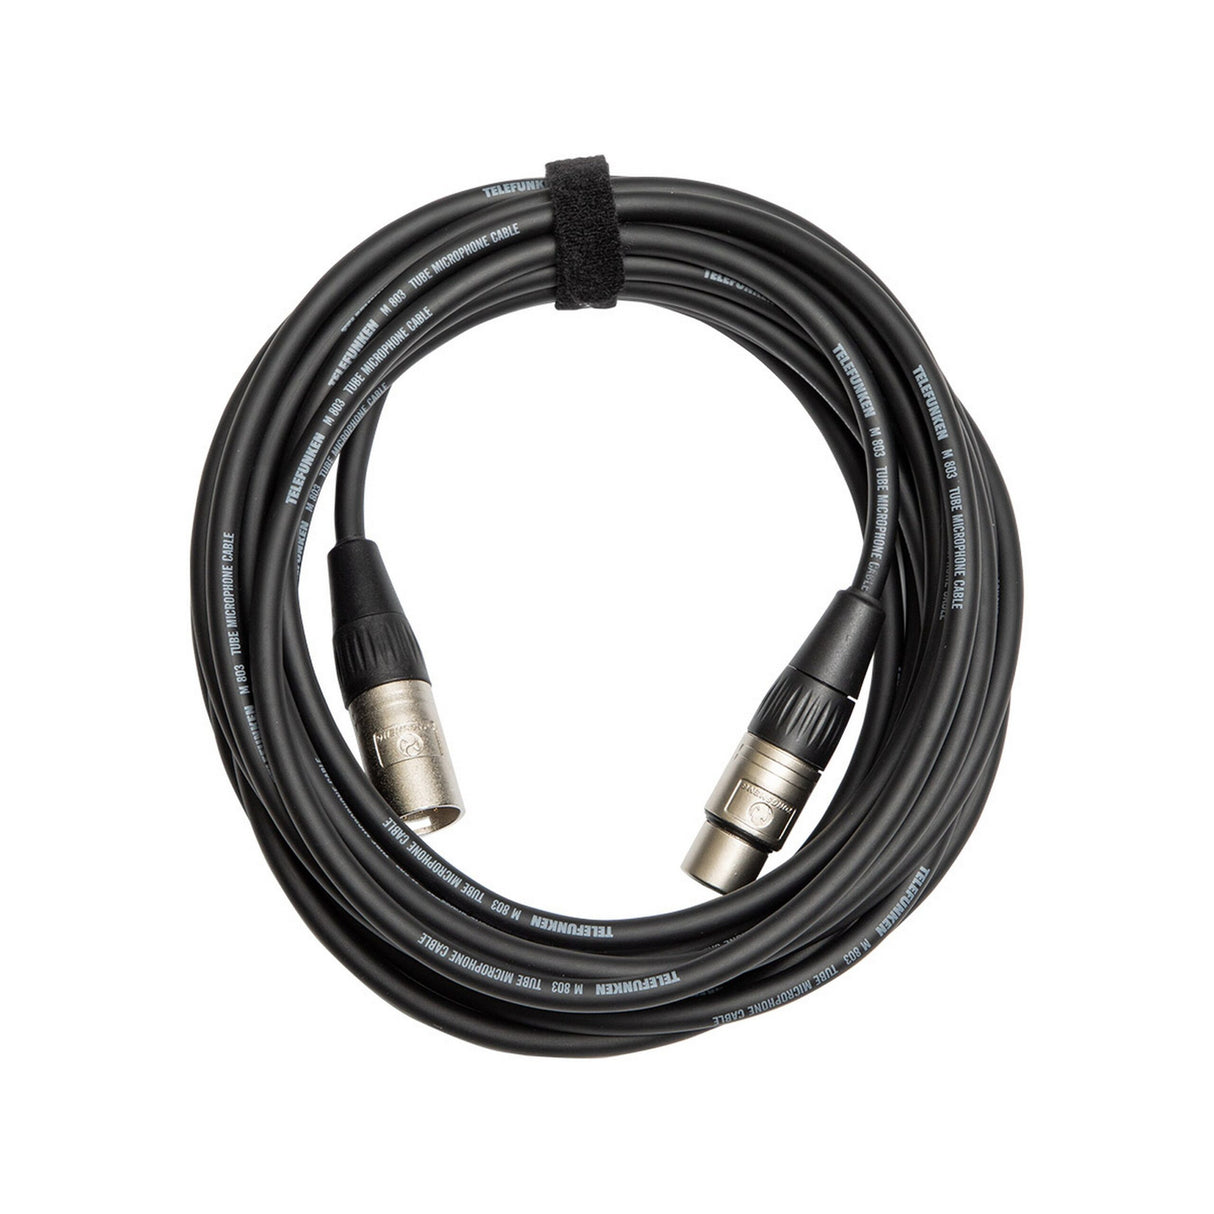 Telefunken M 803 7-Meter Dual-Shielded Cable with 7-Pin XLR Connectors